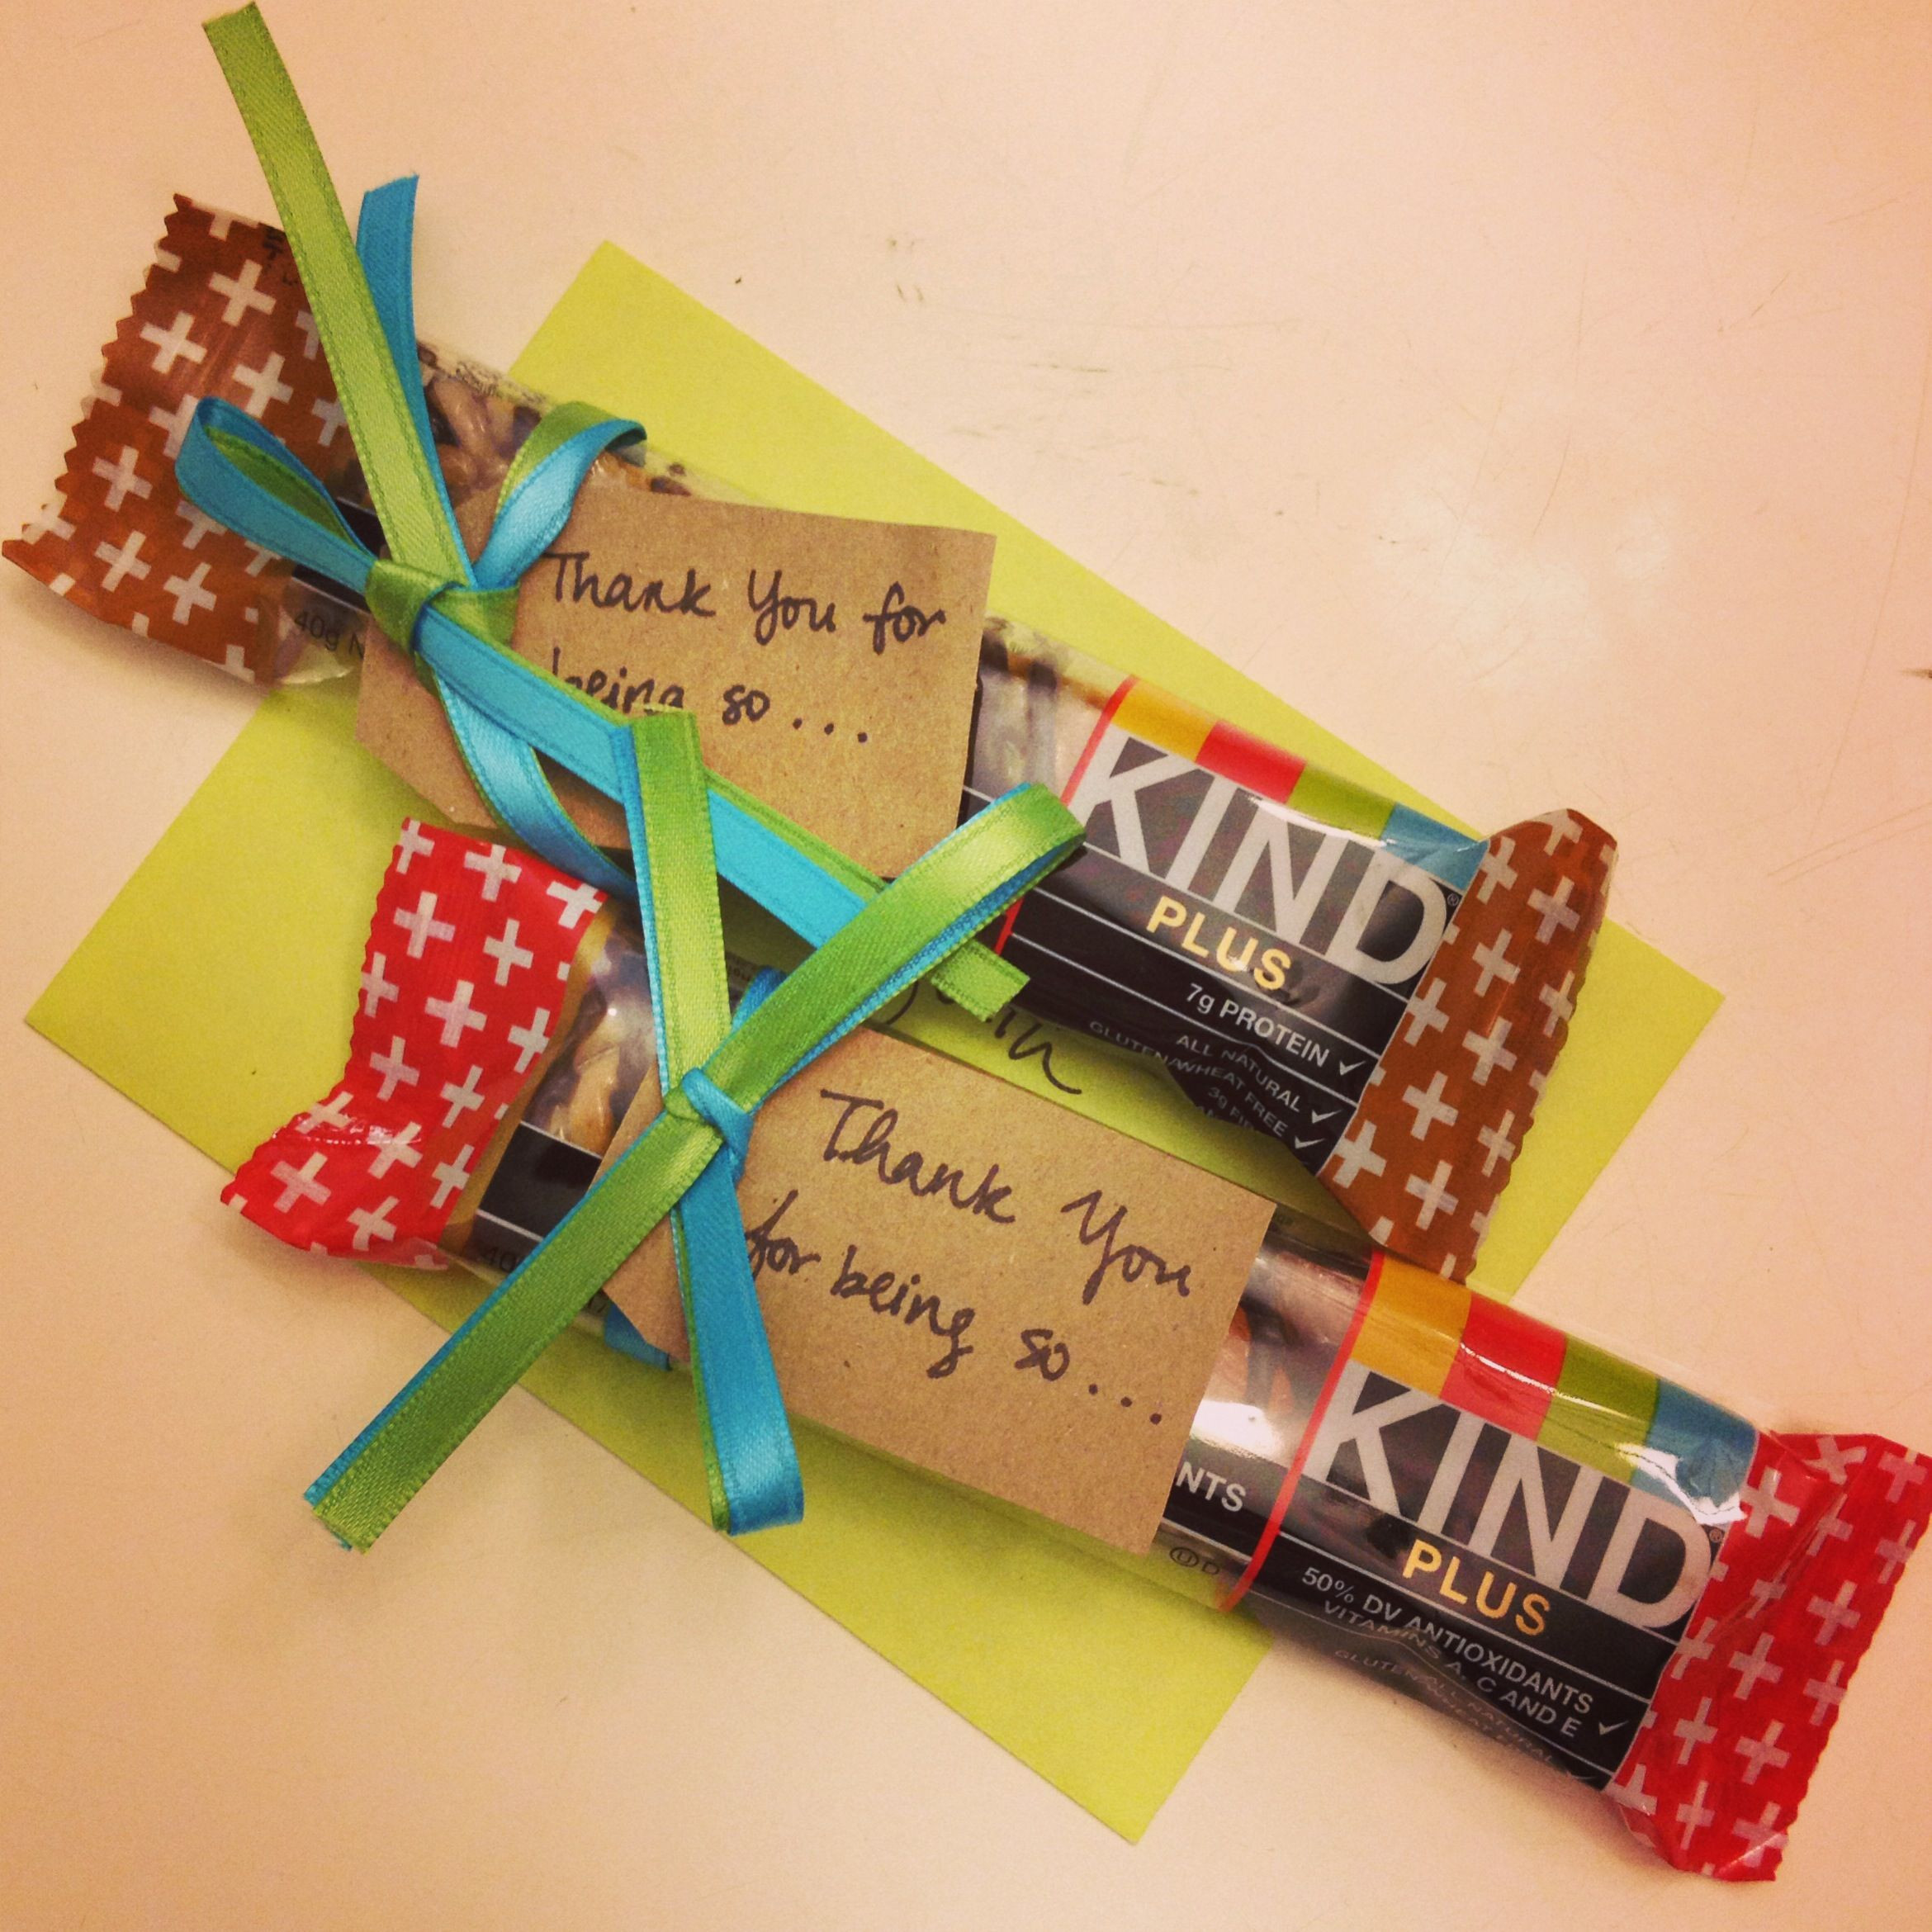 Thank You Gift Ideas For Coworkers
 Cute thank you t idea using KIND bars